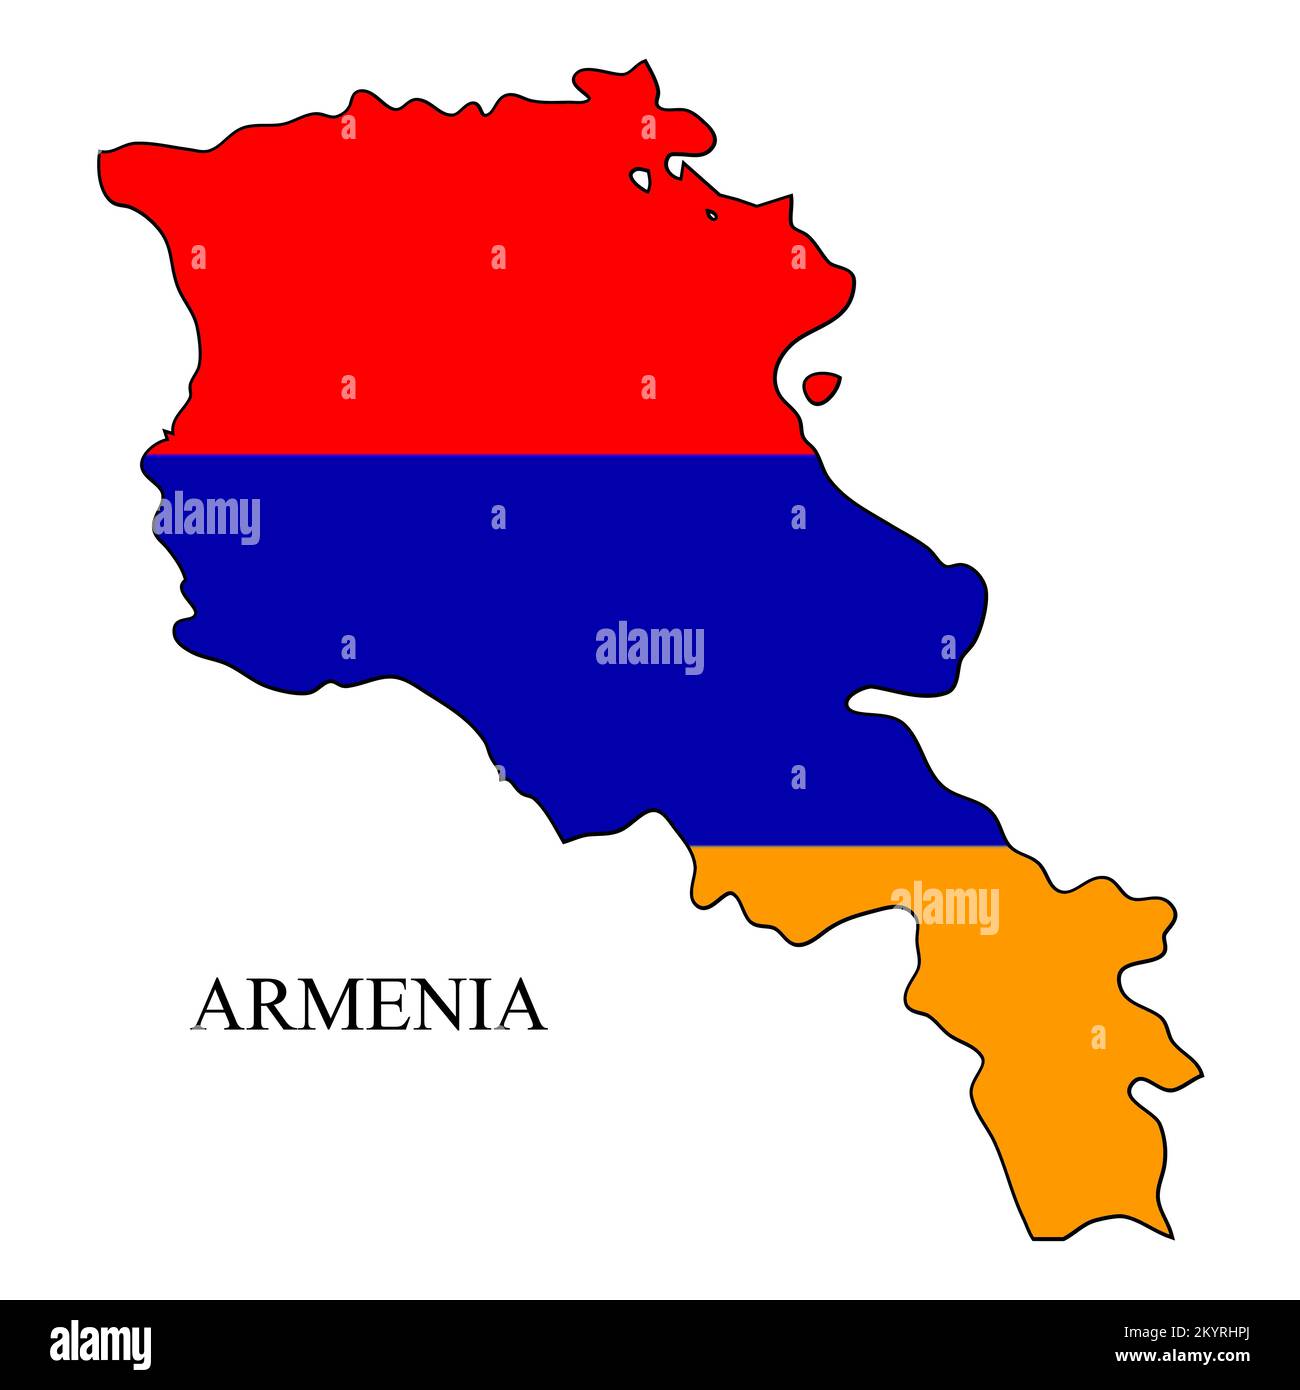 Armenia map vector illustration. Global economy. Famous country. Eastern Europe. West Asia. Stock Vector